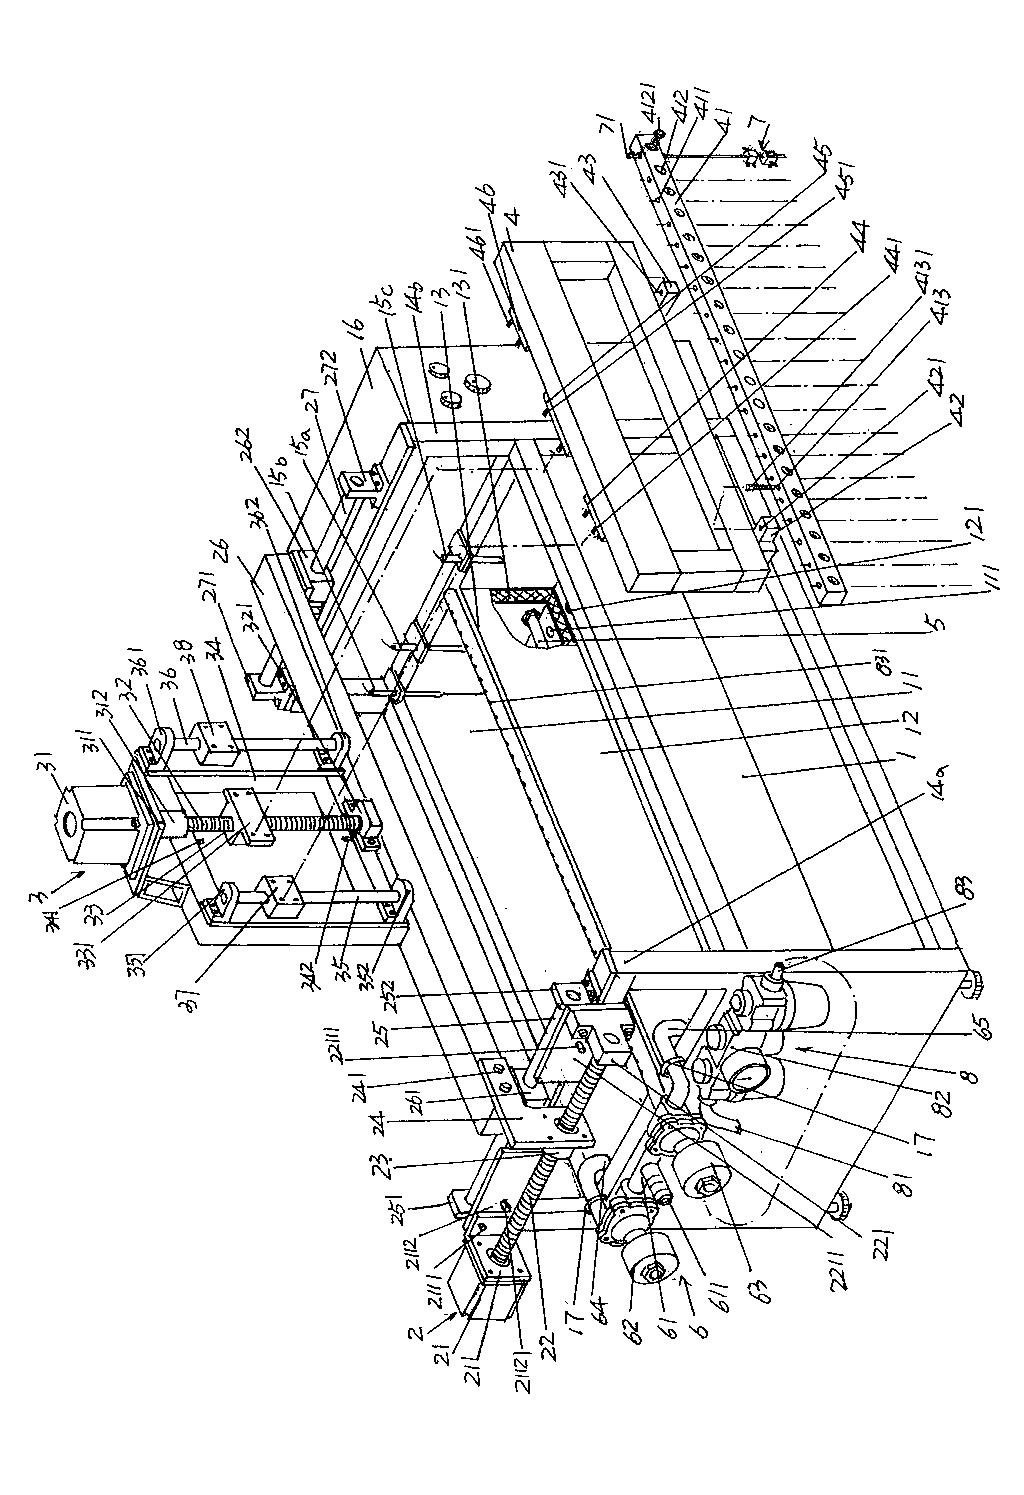 Semiautomatic forming device for spring wire